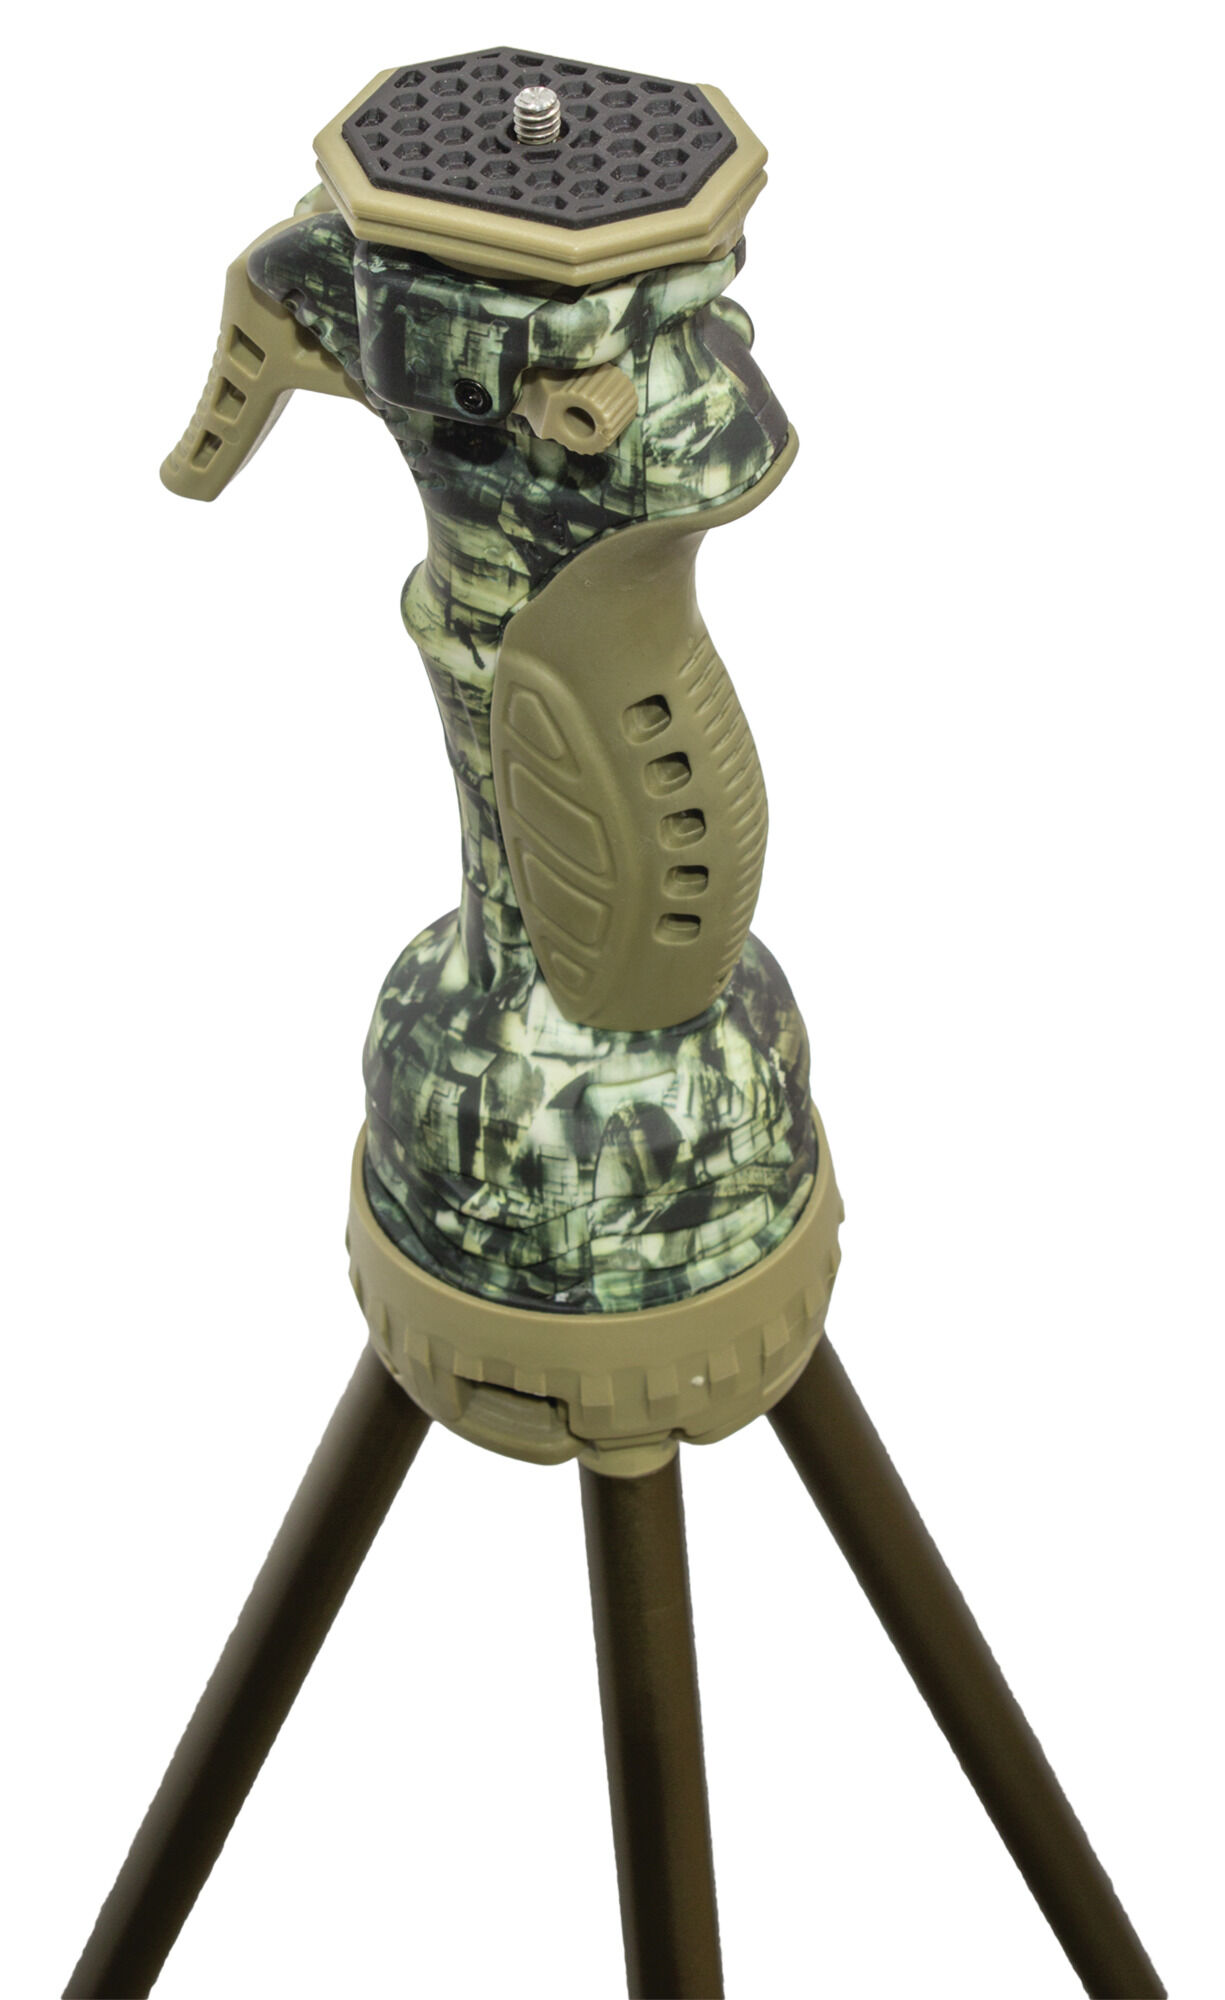 NEW Details about   GEN3 Monopod Camo Trigger Stick Hunting Range Gear Adjustable High Quality 